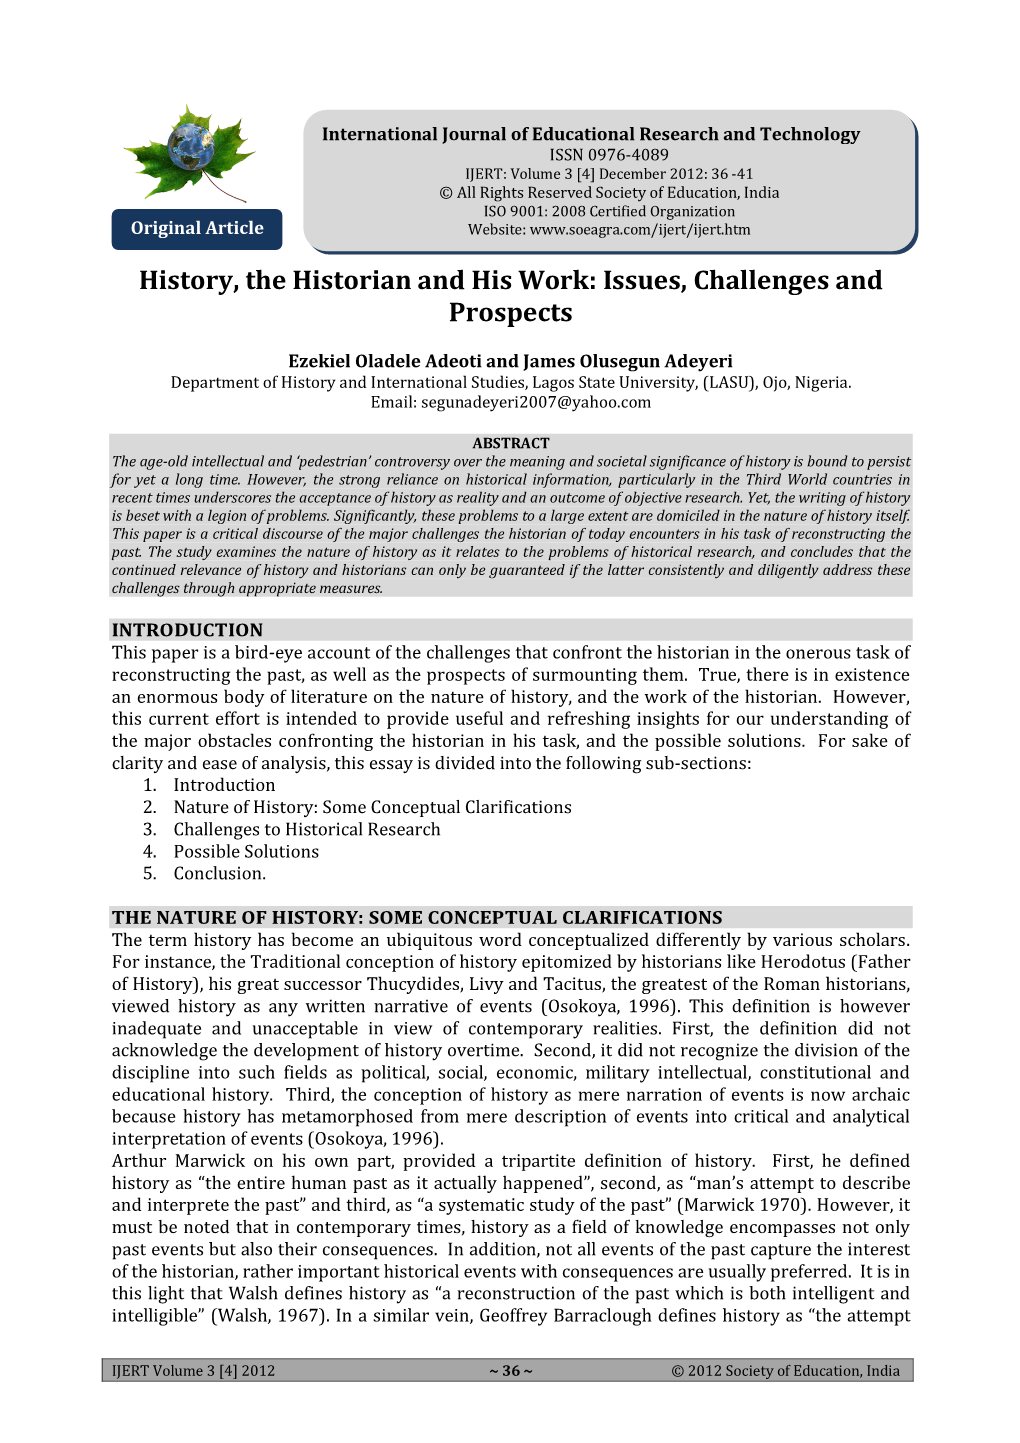 History, the Historian and His Work: Issues, Challenges and Prospects